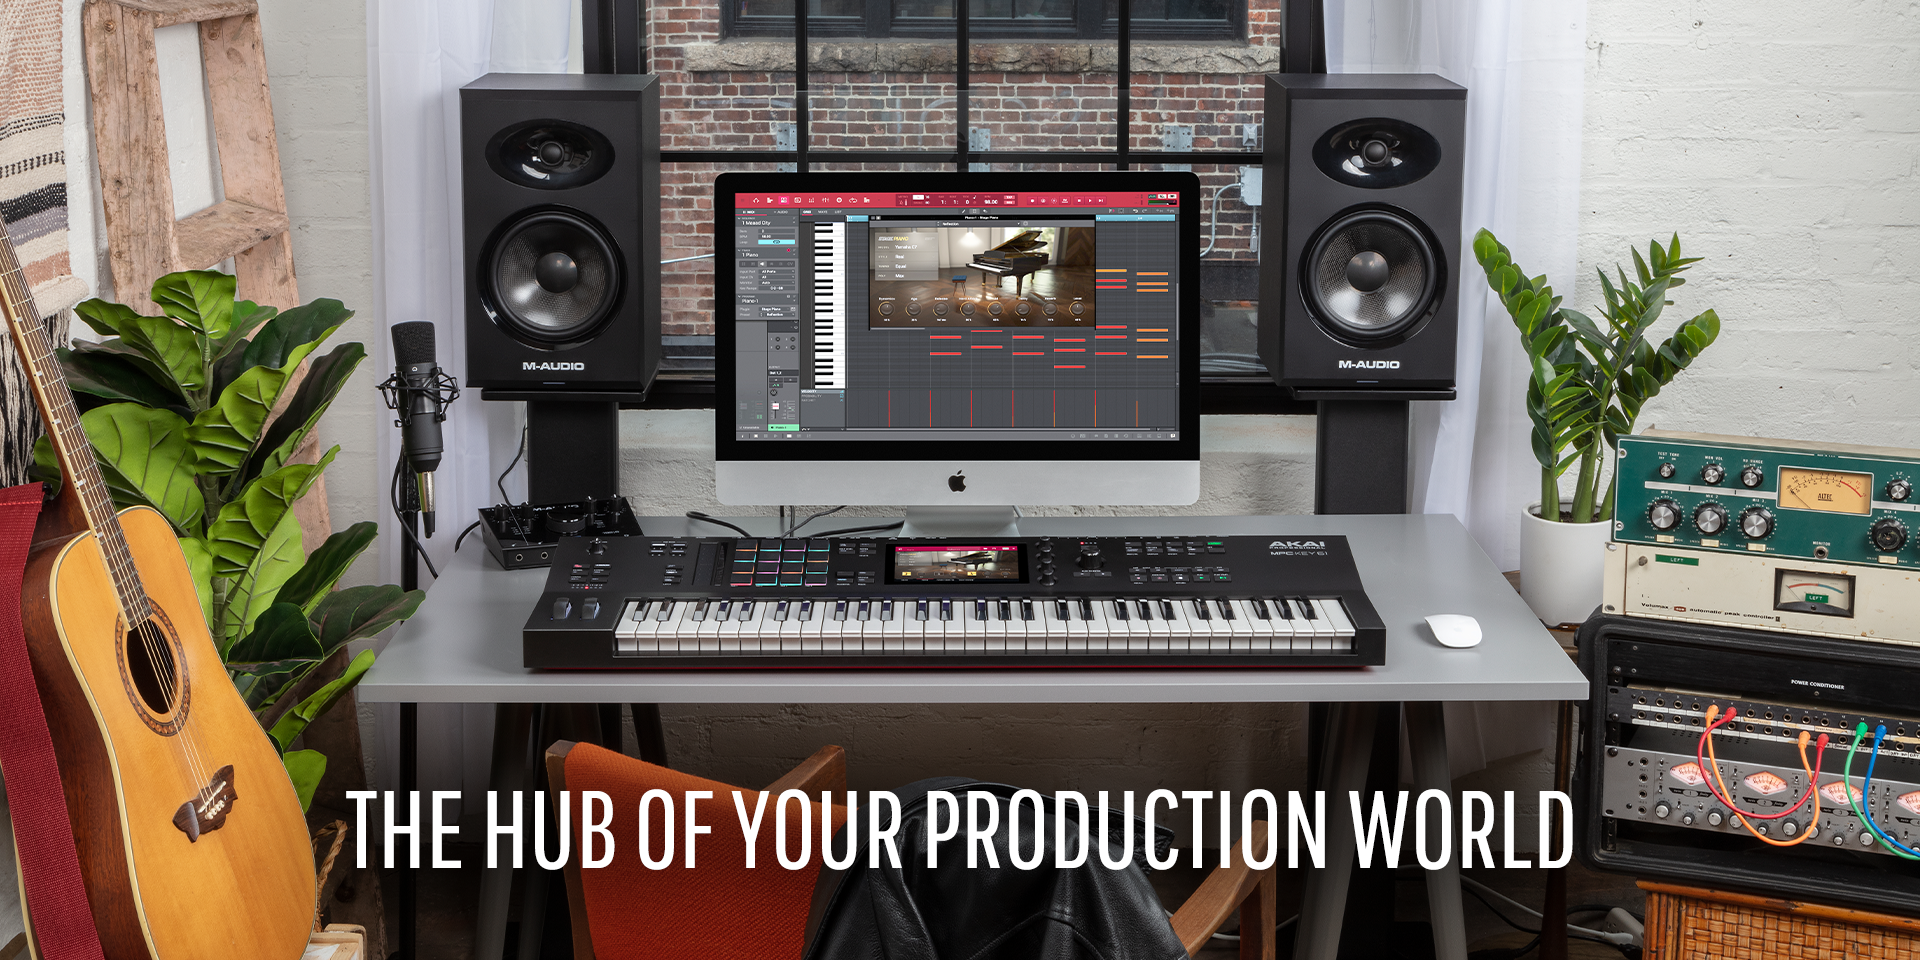 The hub of your production world